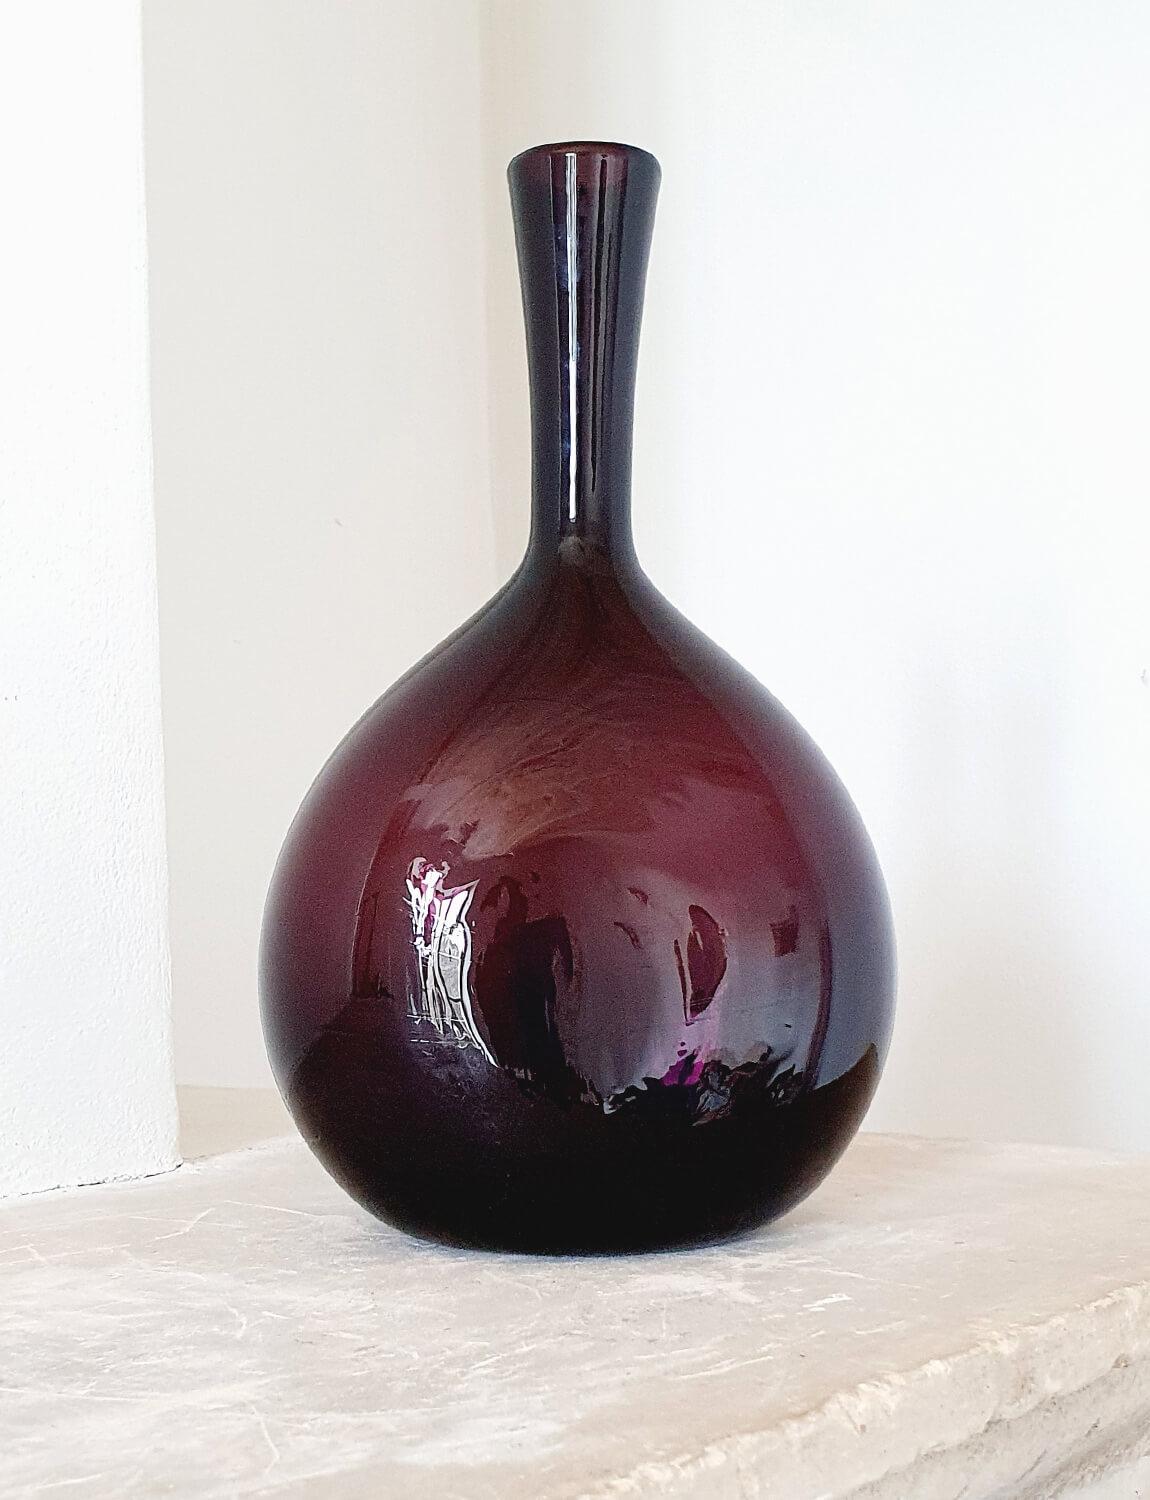 An Italian hand-blown Empoli Glass wine bottle made in a cranberry coloured (dark purple) glass. This exceptional bottle was hand-blown in Empoli in the 1950s. In the last century Empoli in Tuscany was one of the most famous glass-blowing regions of